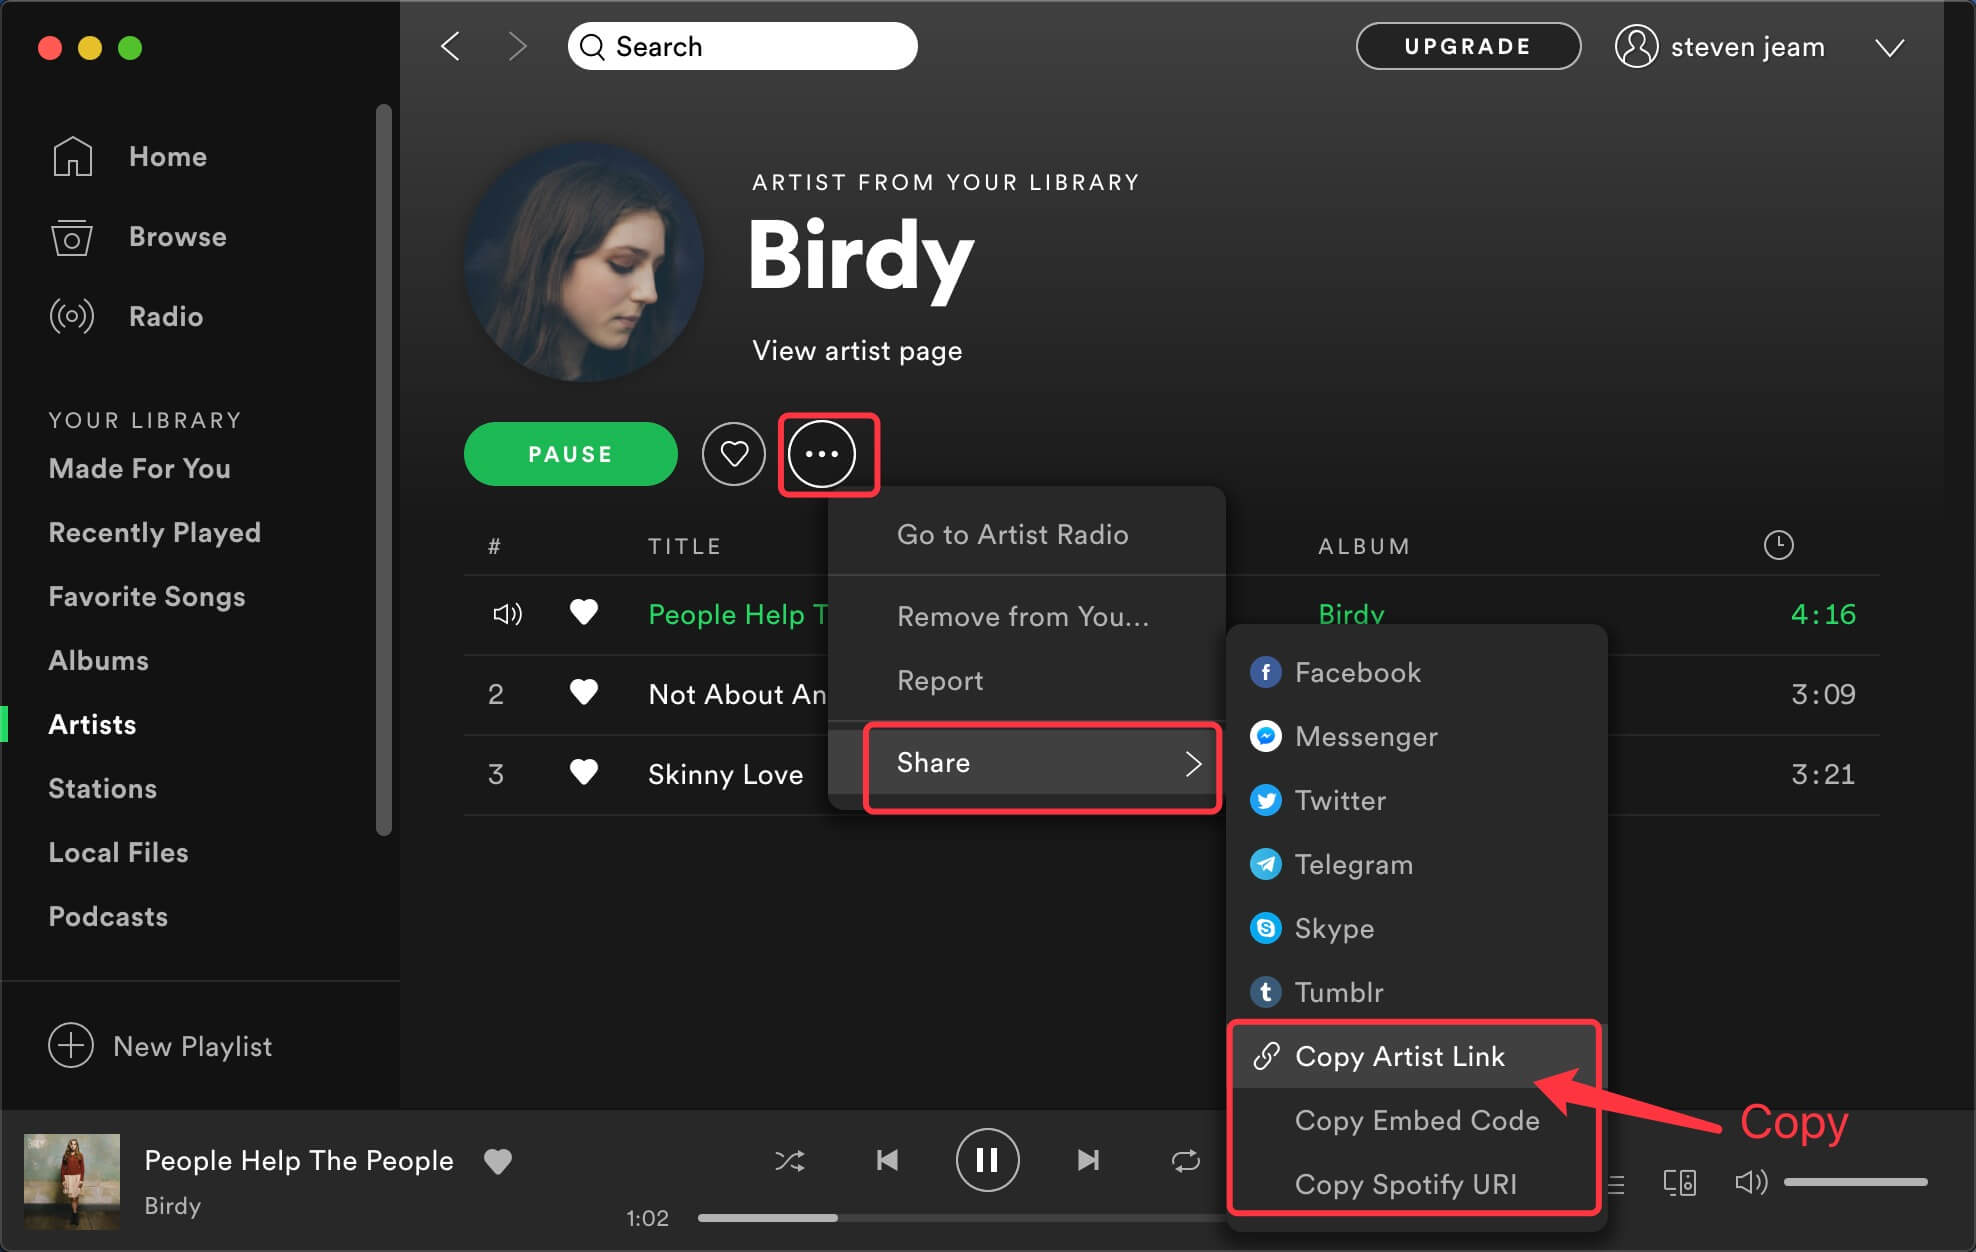 how to get mp3 files from spotify